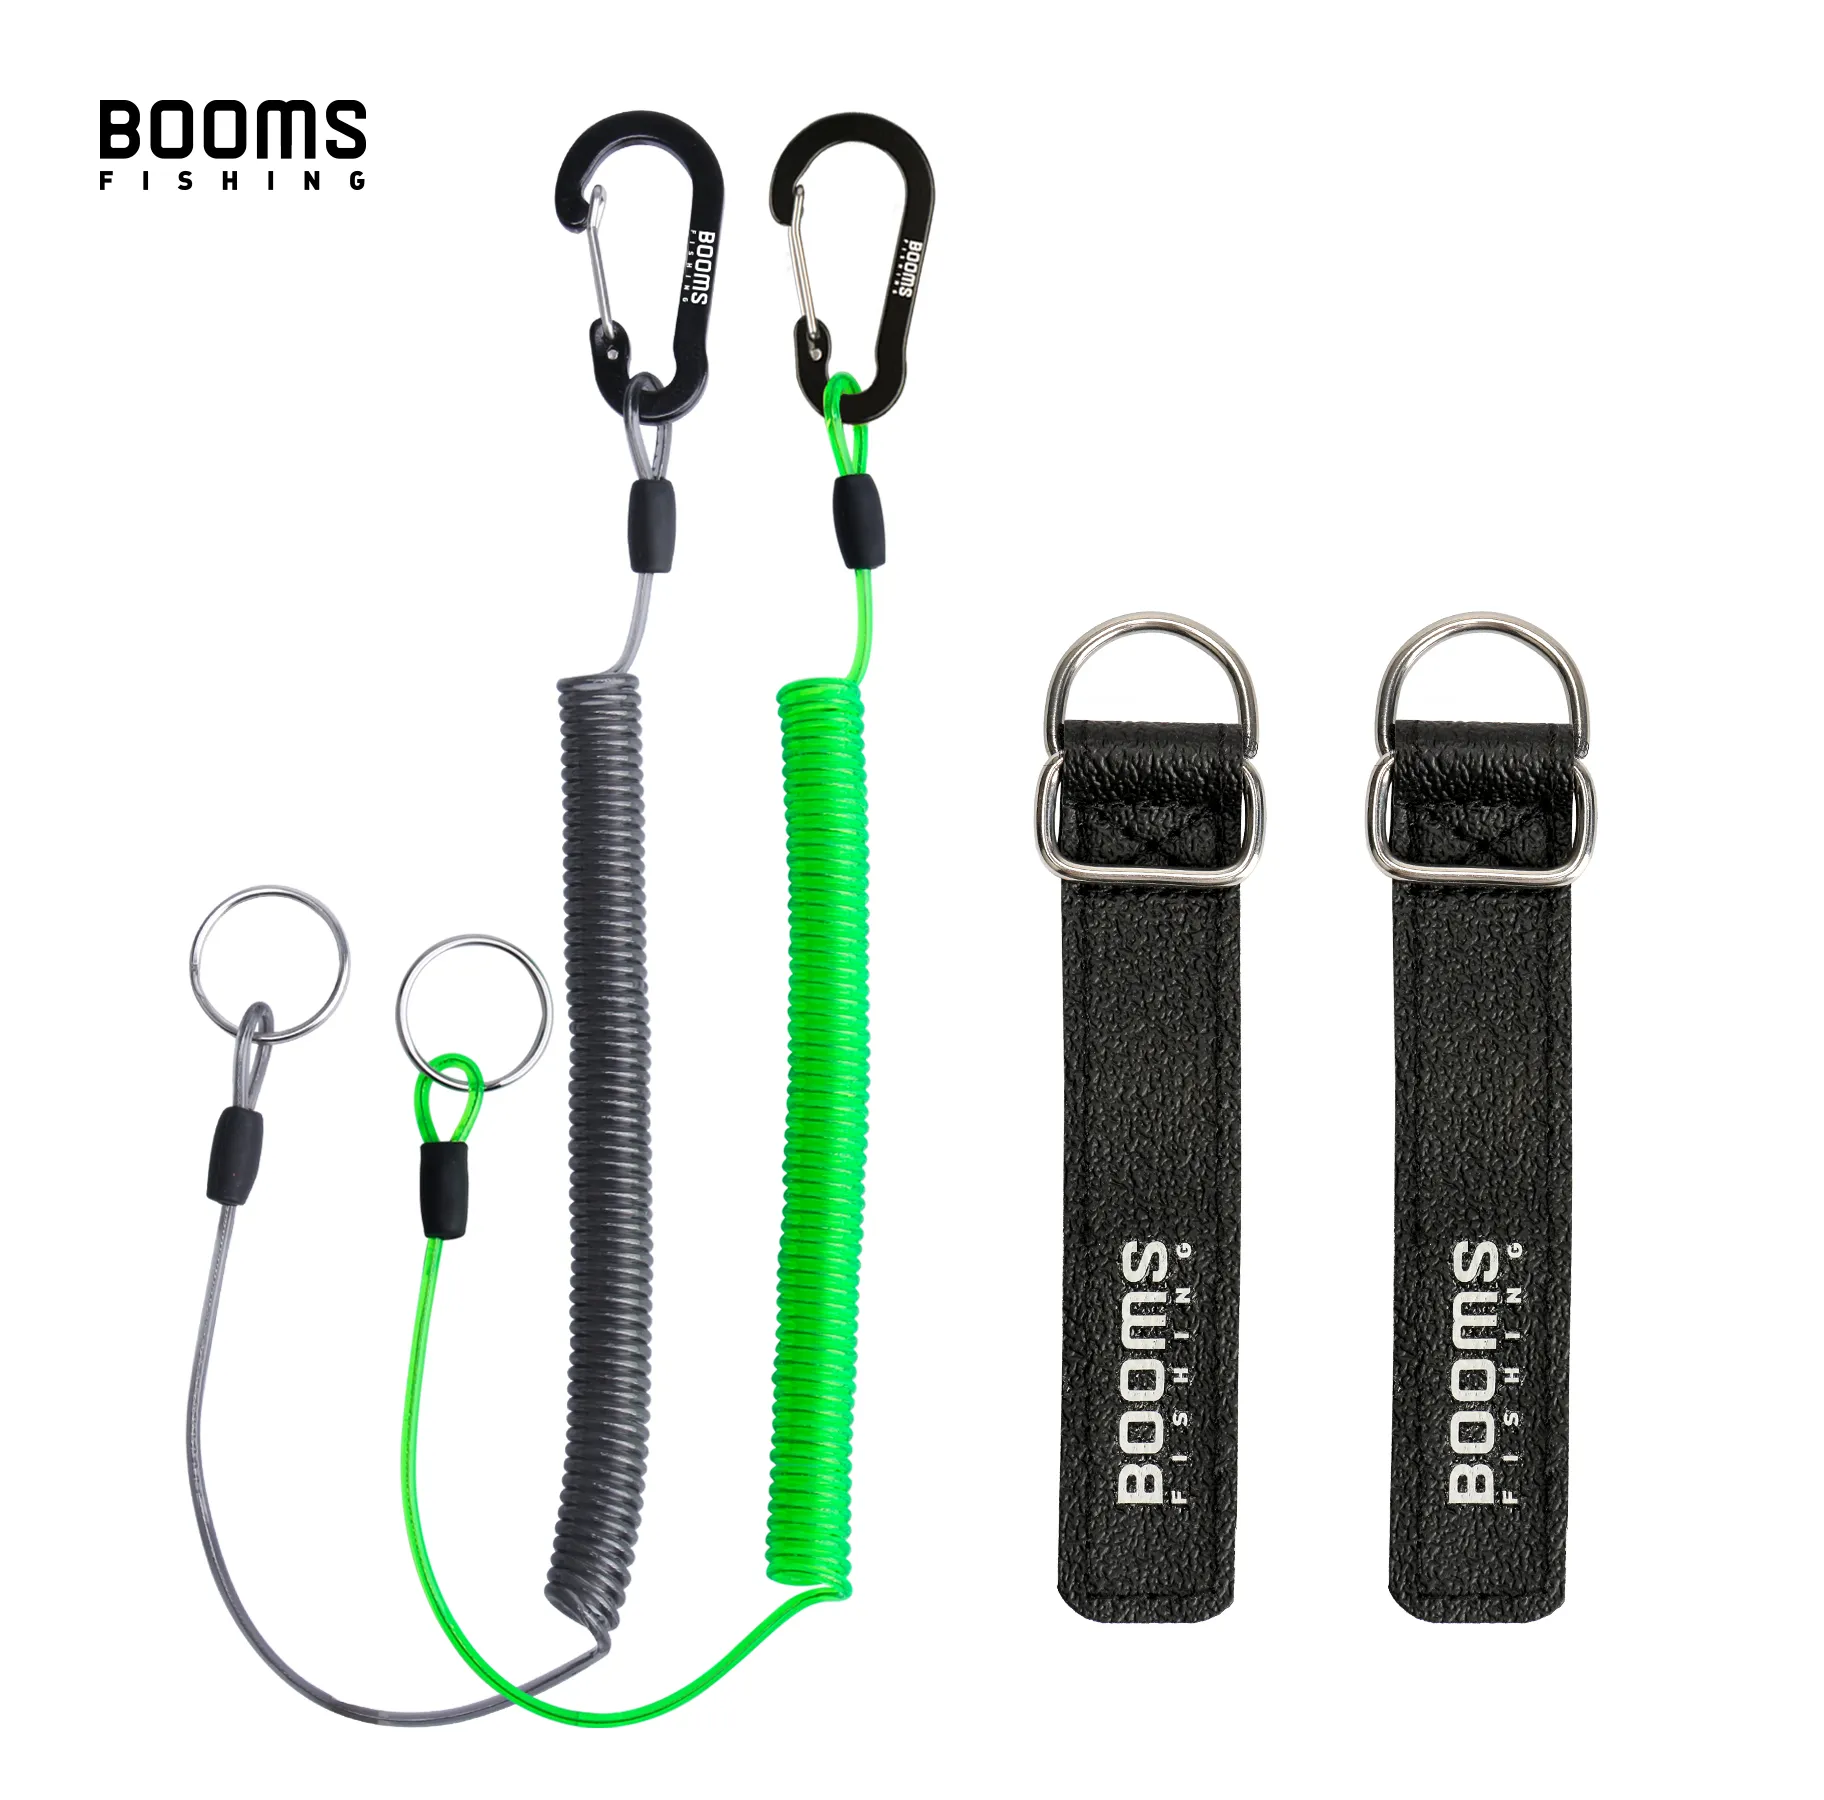 Booms Fishing T01 2M Fishing Coiled Lanyards with Rod Tie Beltb Fishing Lanyard  for Boating Ropes with Camping Carabiner Tools